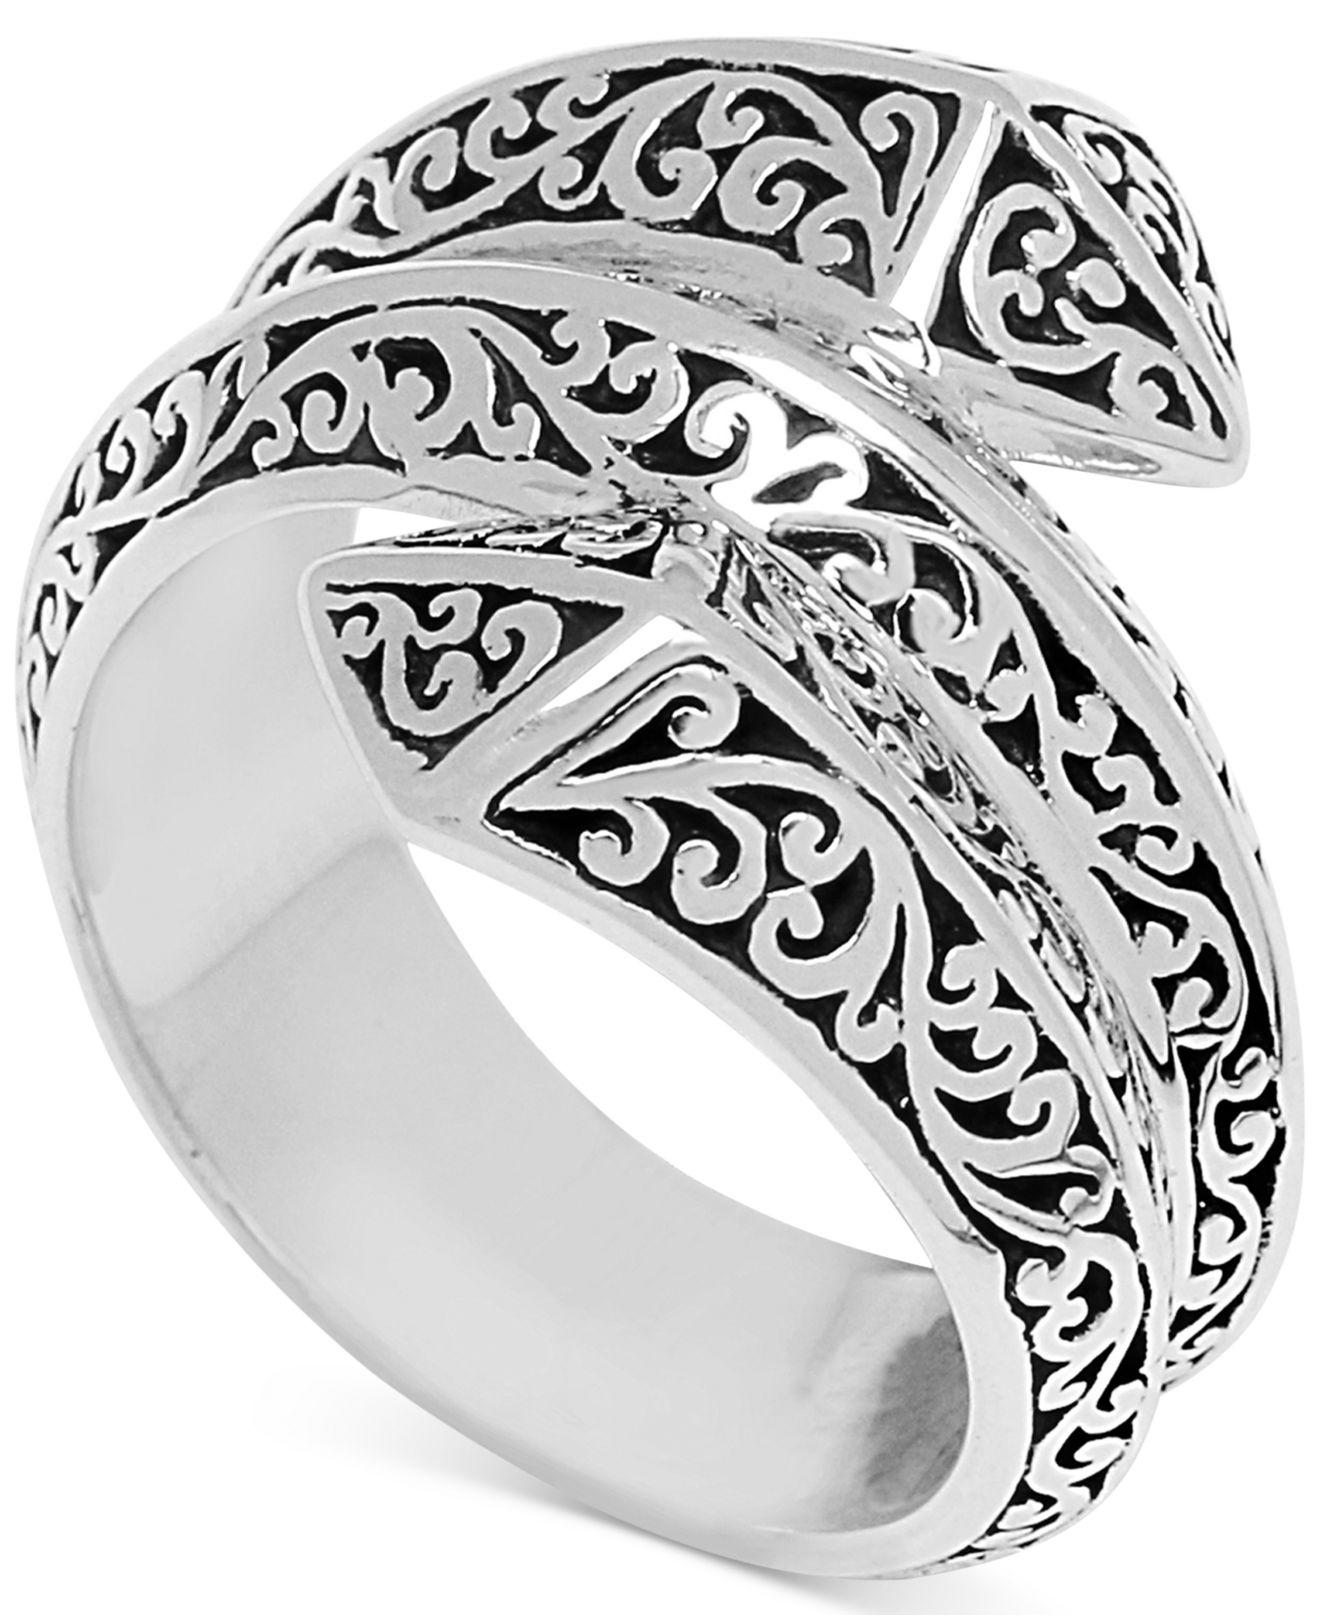 Lois Hill Filigree Pyramid Wrap Ring In Sterling Silver in Metallic Lyst